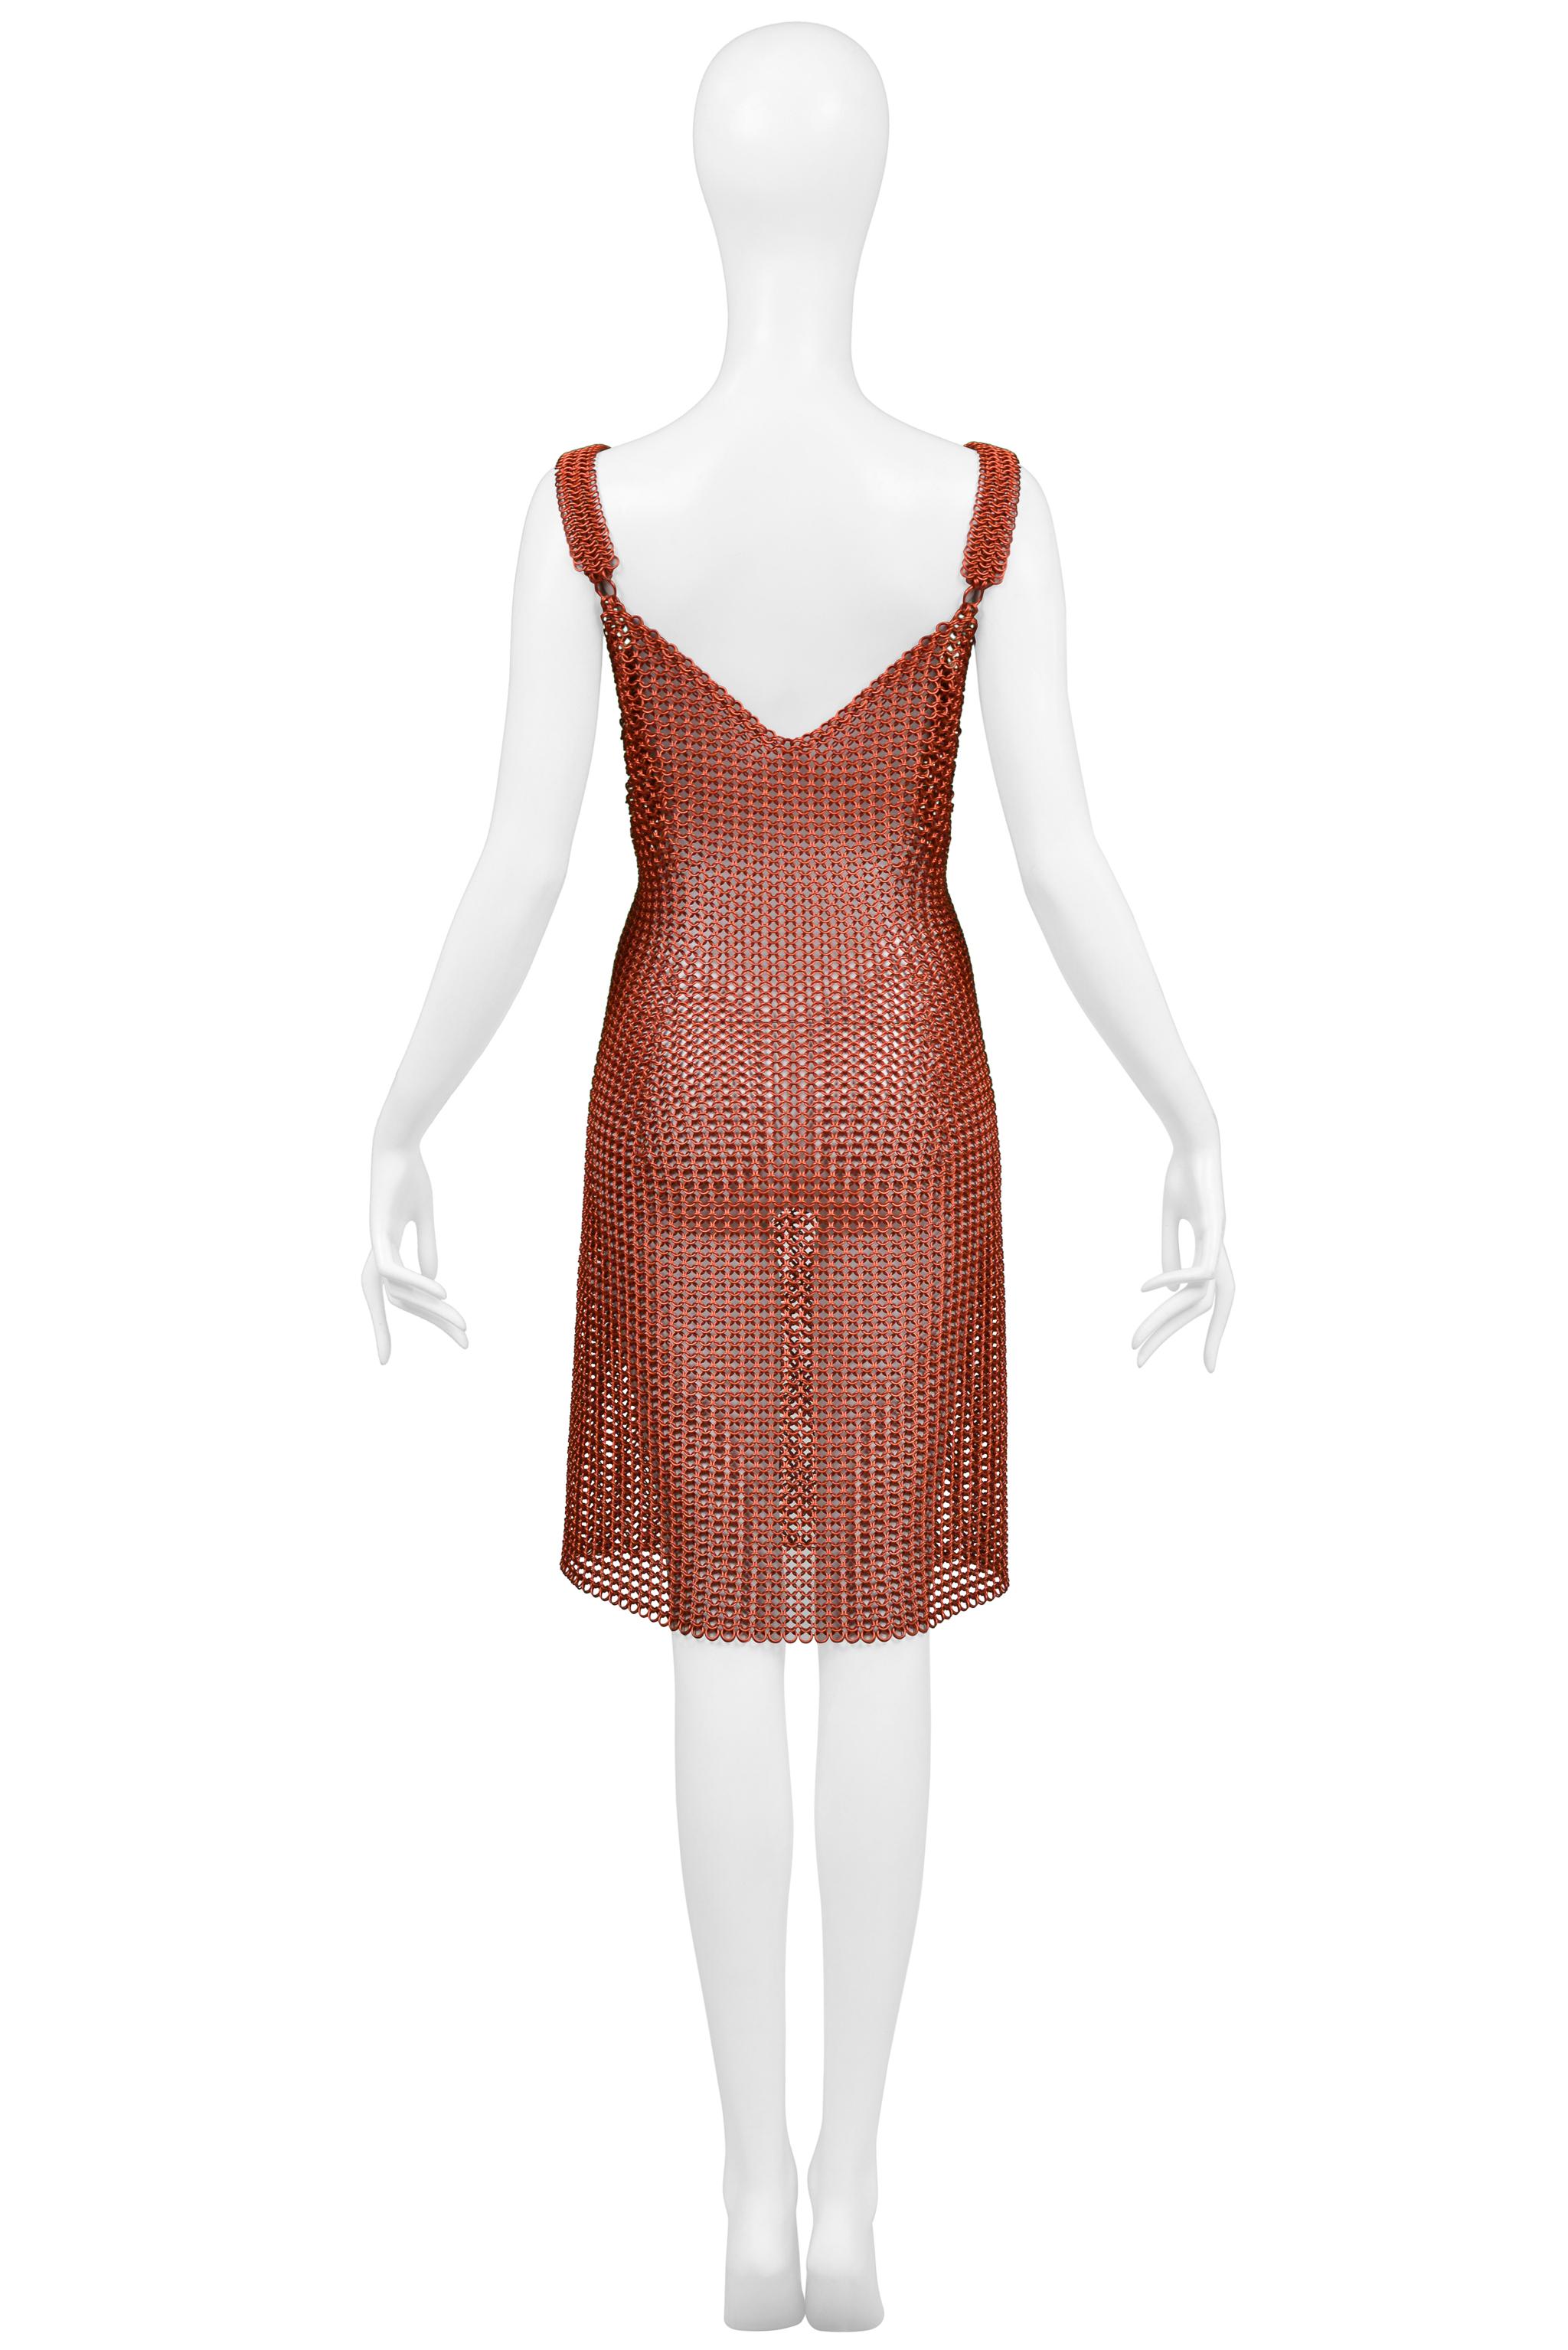 Todd Oldham Red Metal Chain Link Dress 1995 For Sale 2